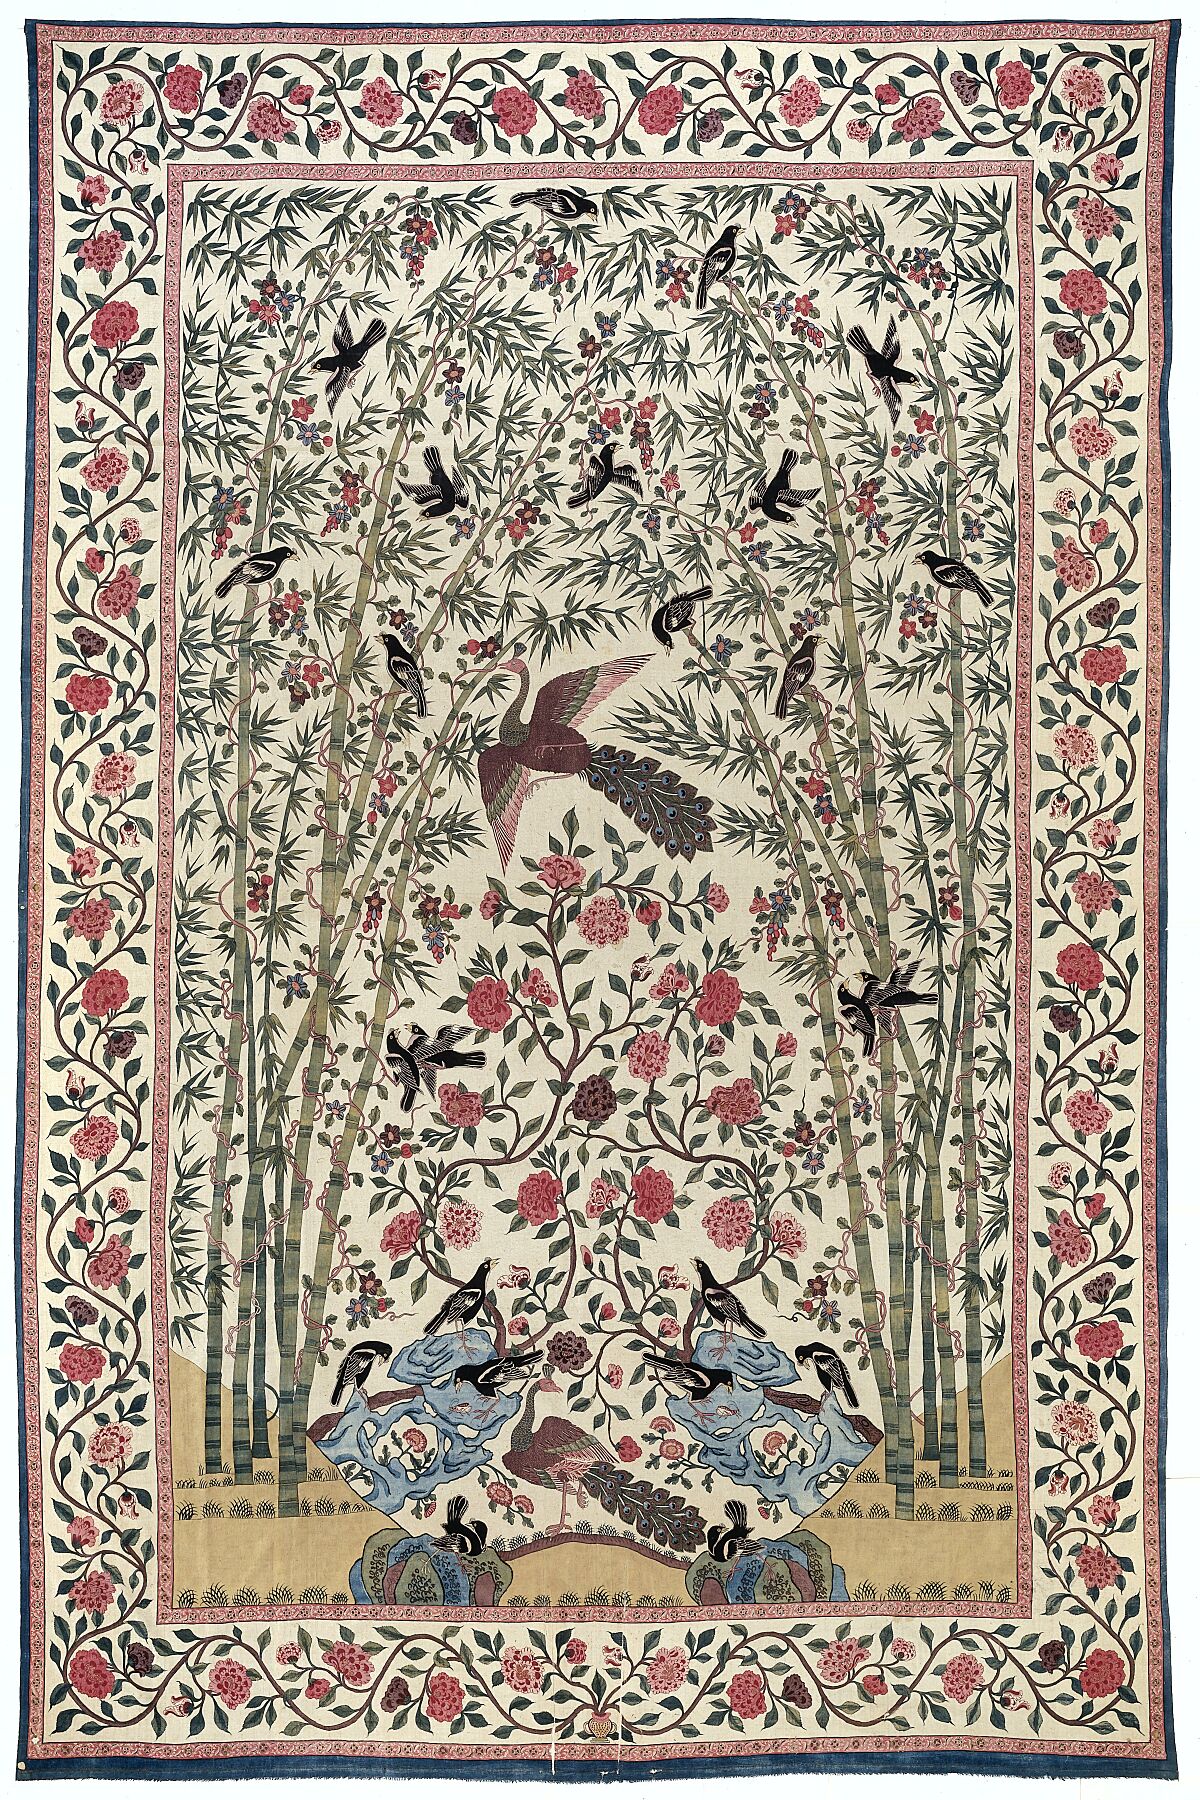 Palempore - anonymous, c. 1750 - c. 1775 a type of hand-painted and mordant-dyed bed cover that was made in India for the export market during the 18th century and very early 19th century.